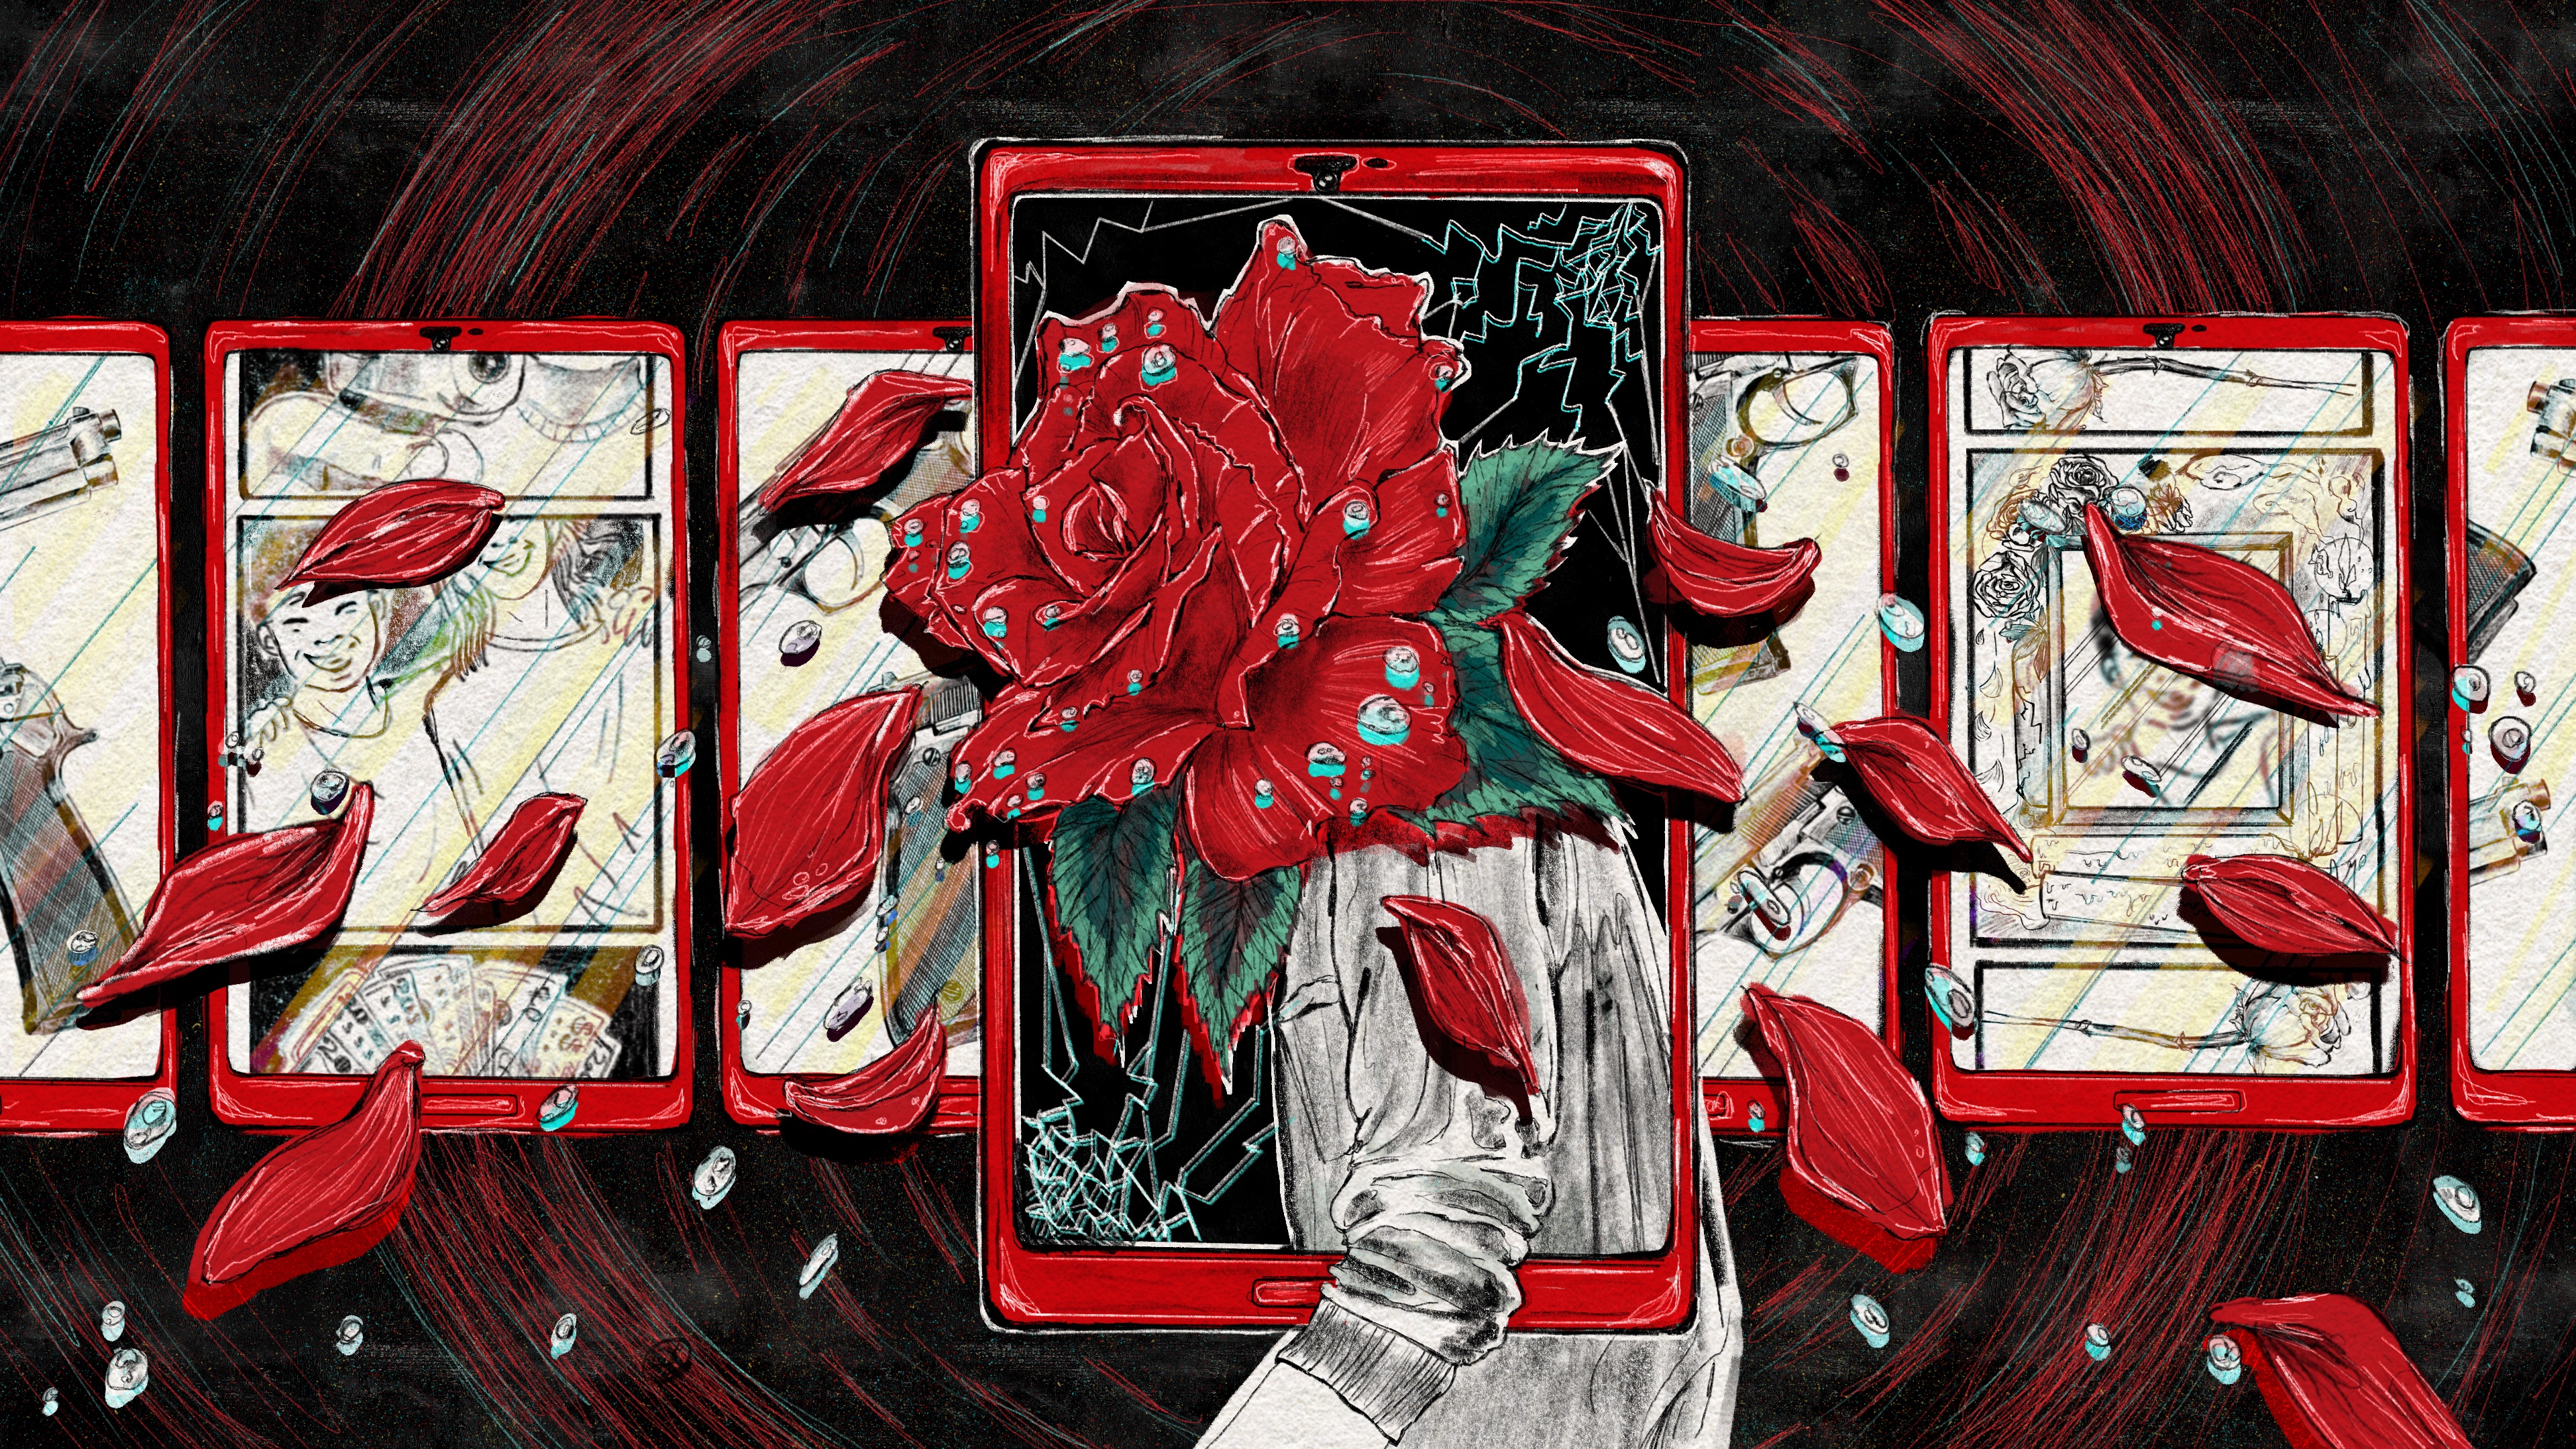 A digital drawing, made with black pencil and red and neon-blue gouache, shows a teenager standing in the center. The figure’s human head has been replaced with a red rose, which is losing its petals. The rose petals fall around the figure with drops of water, symbolizing tears. The figure’s body is half within a broken smartphone, the frame of which is colored the same red as the rose. In the background, smaller red cellphones are aligned horizontally. Their screens show a combination of guns, a happy human teen with a friend, and a memorial of the same teen. Behind everything, the base background is black and ominous.